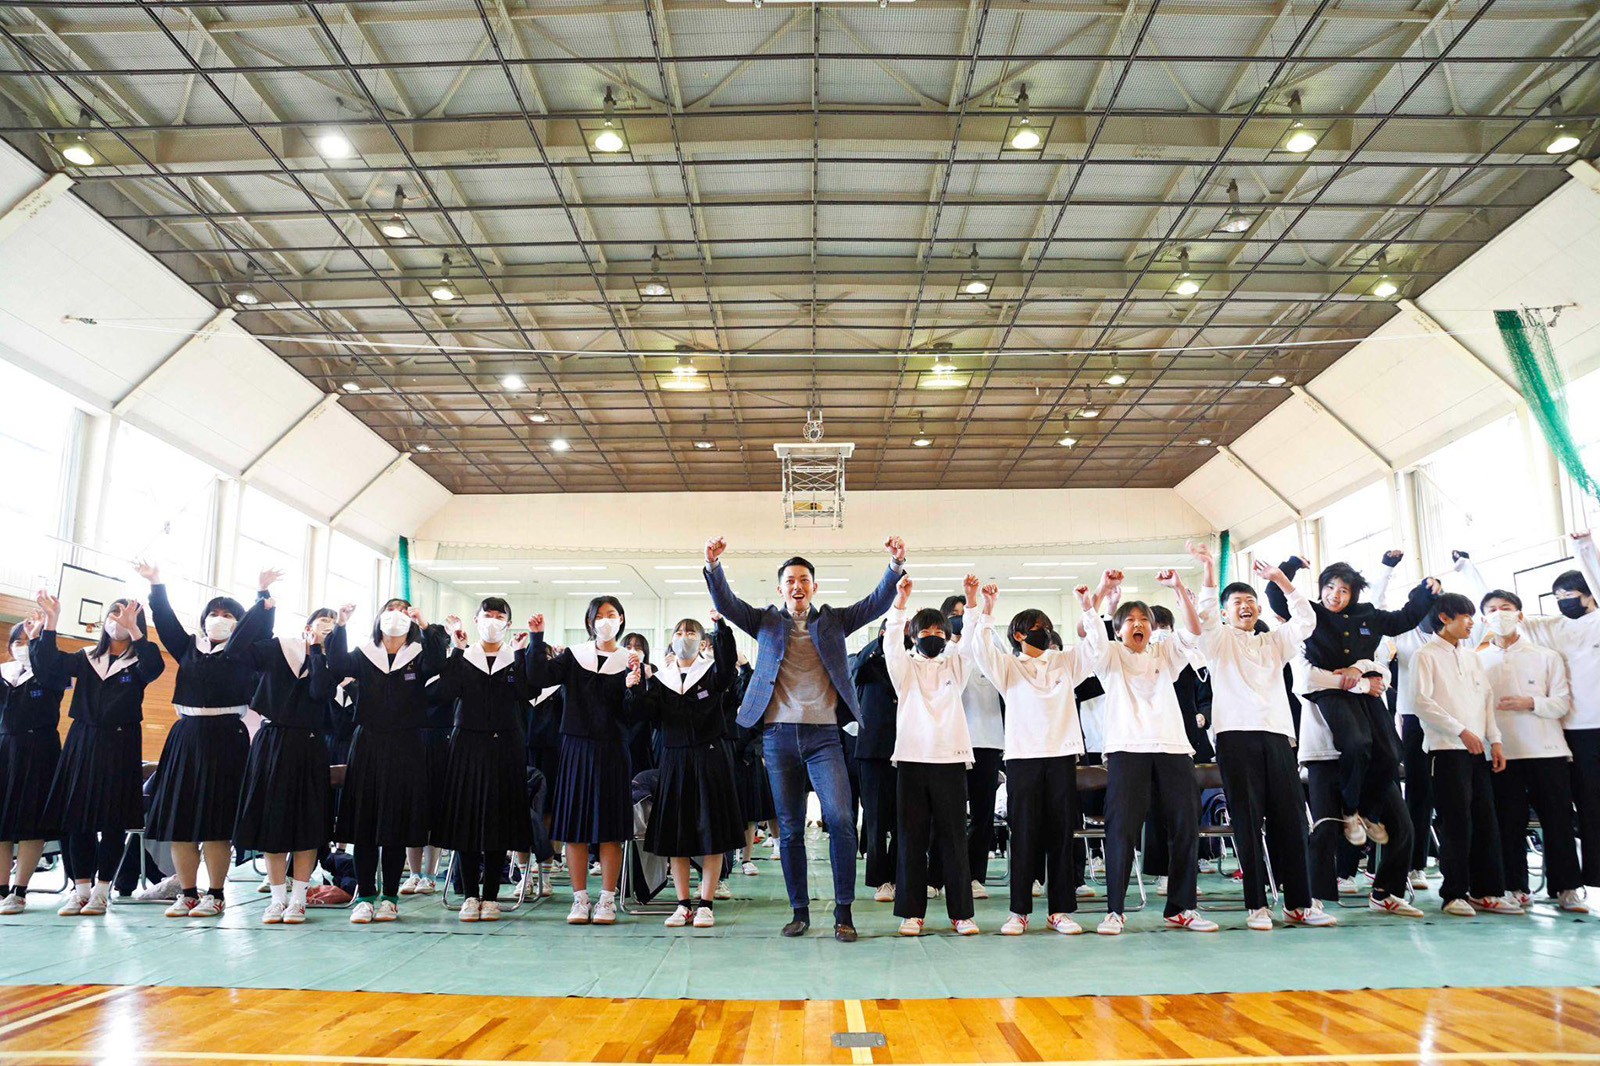 Photo: Second grade pupils at Nagashima Junior High School in Kuwana, Mie prefecture, who attended Ryosuke’s lecture.